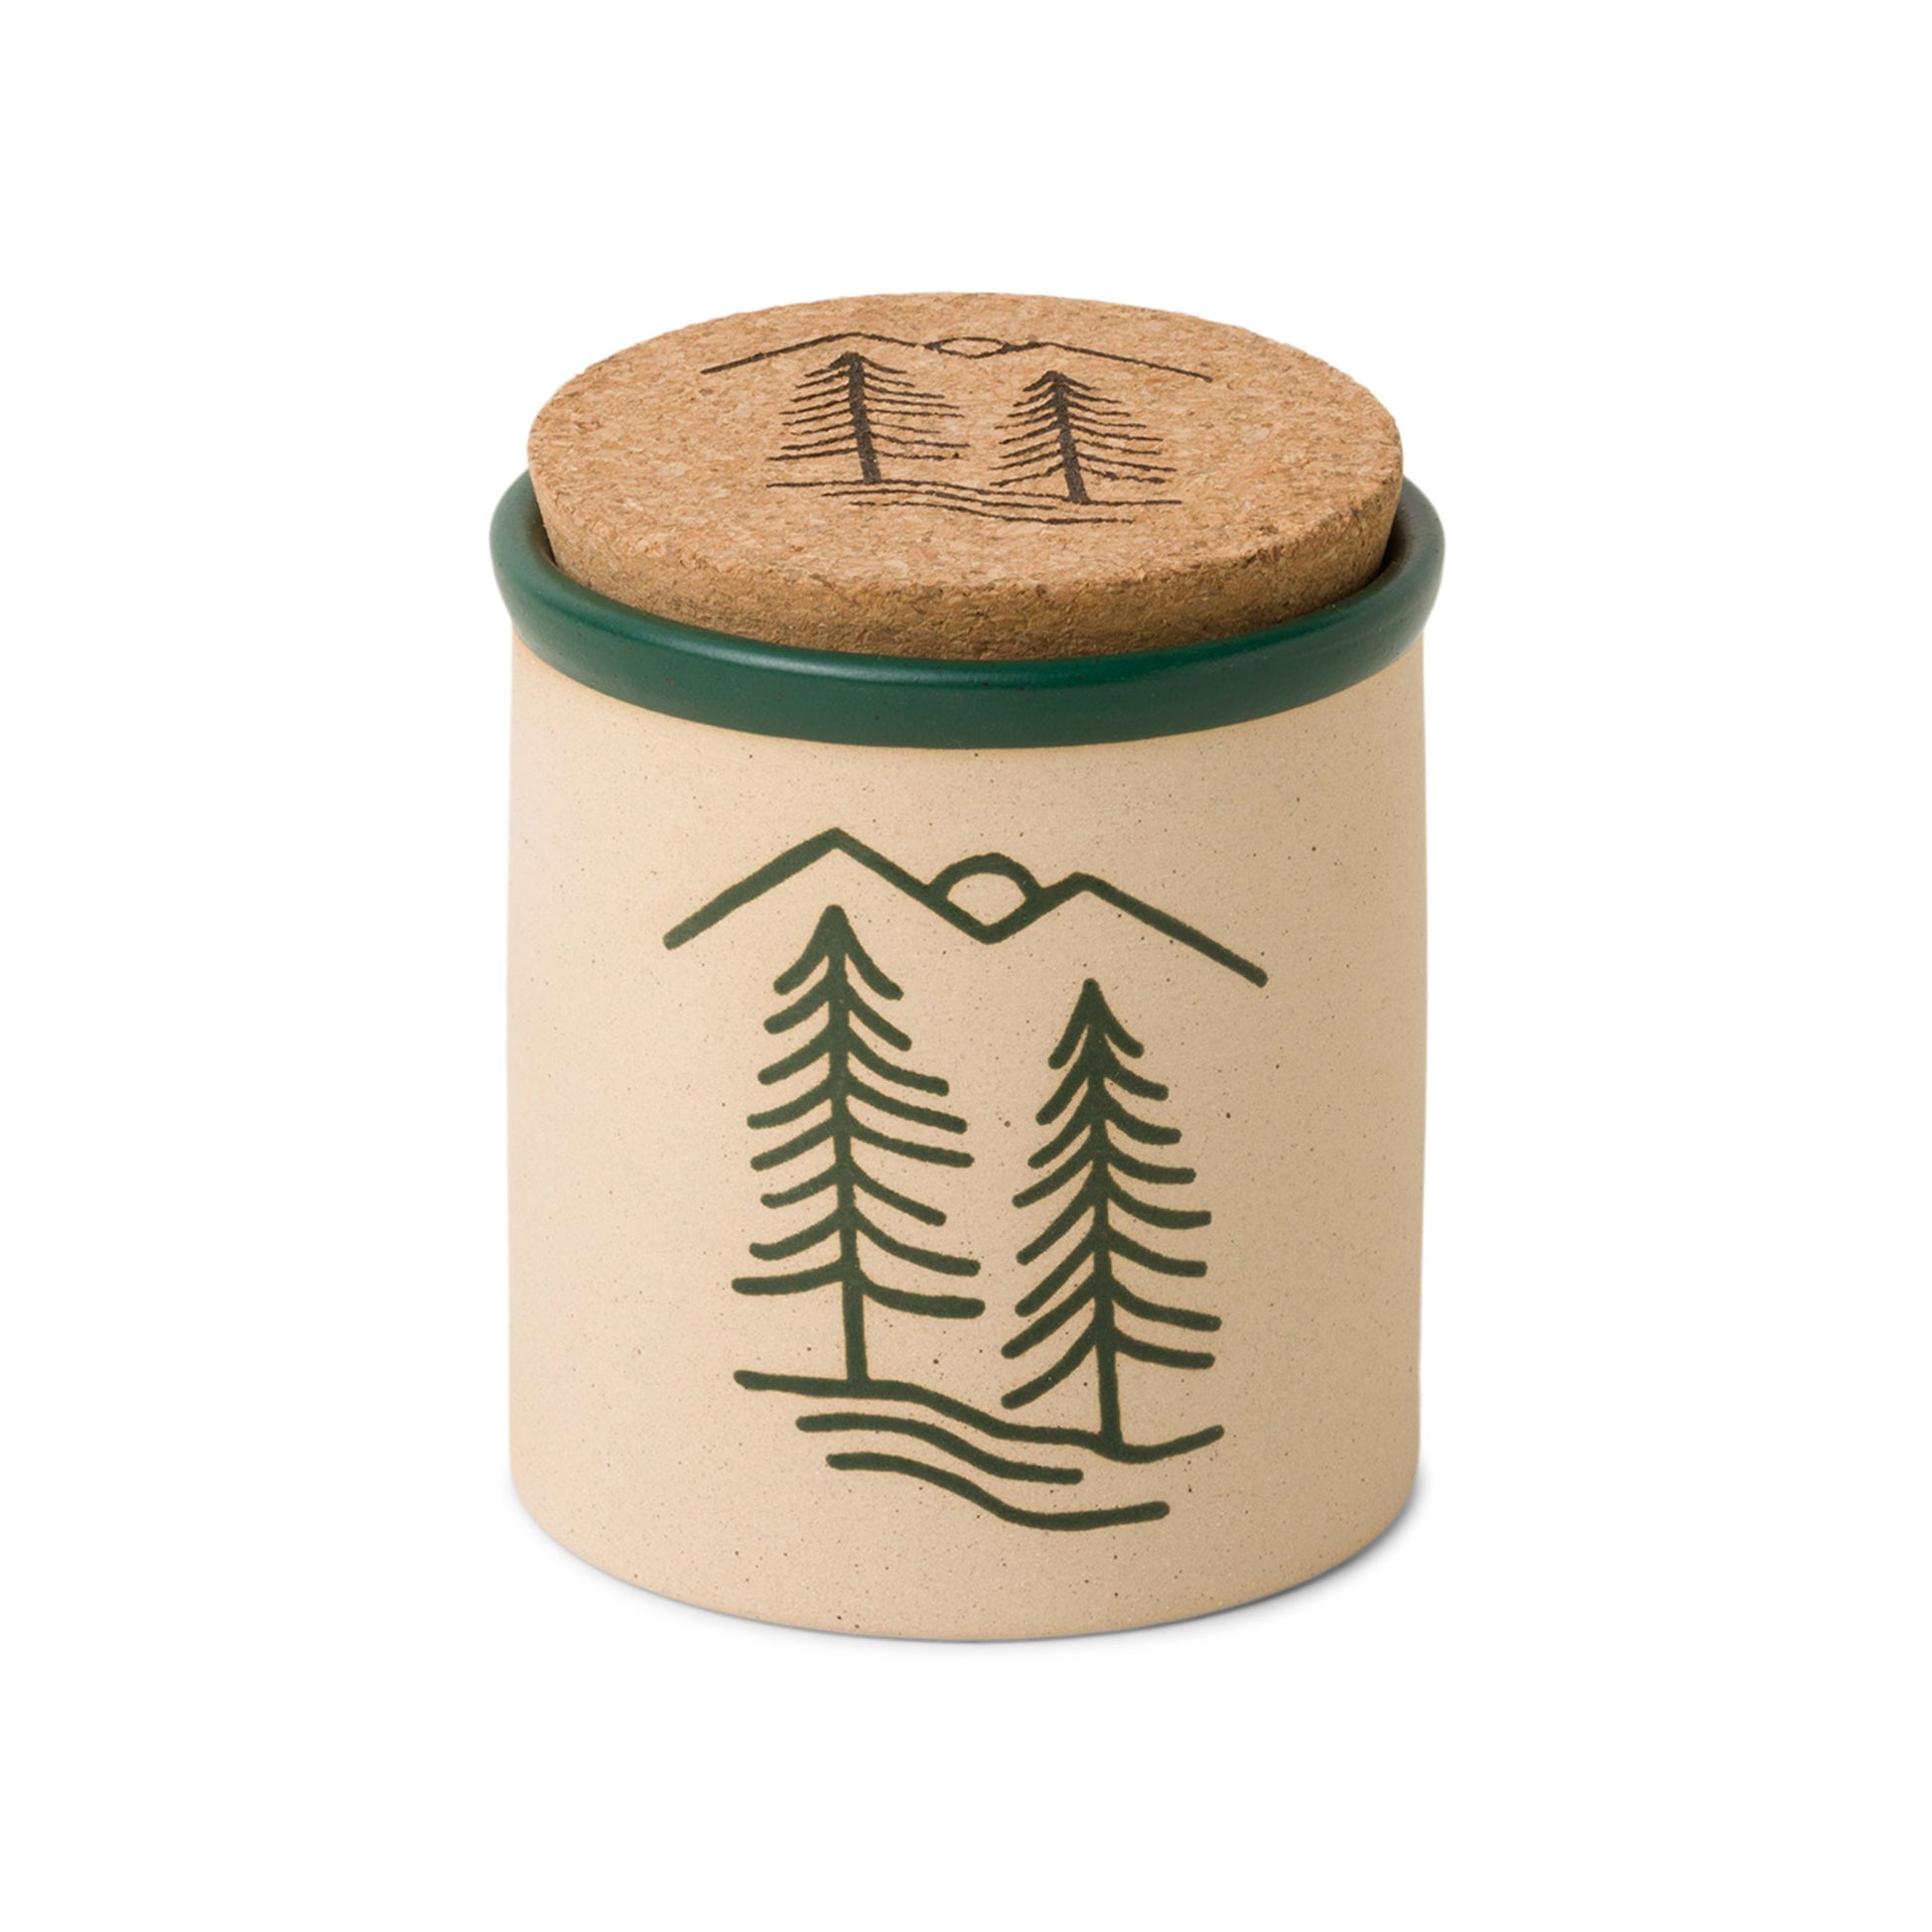 Cypress + Fir - 8 oz. Dark Green Ceramic Candle with tan colored vessel and cork top